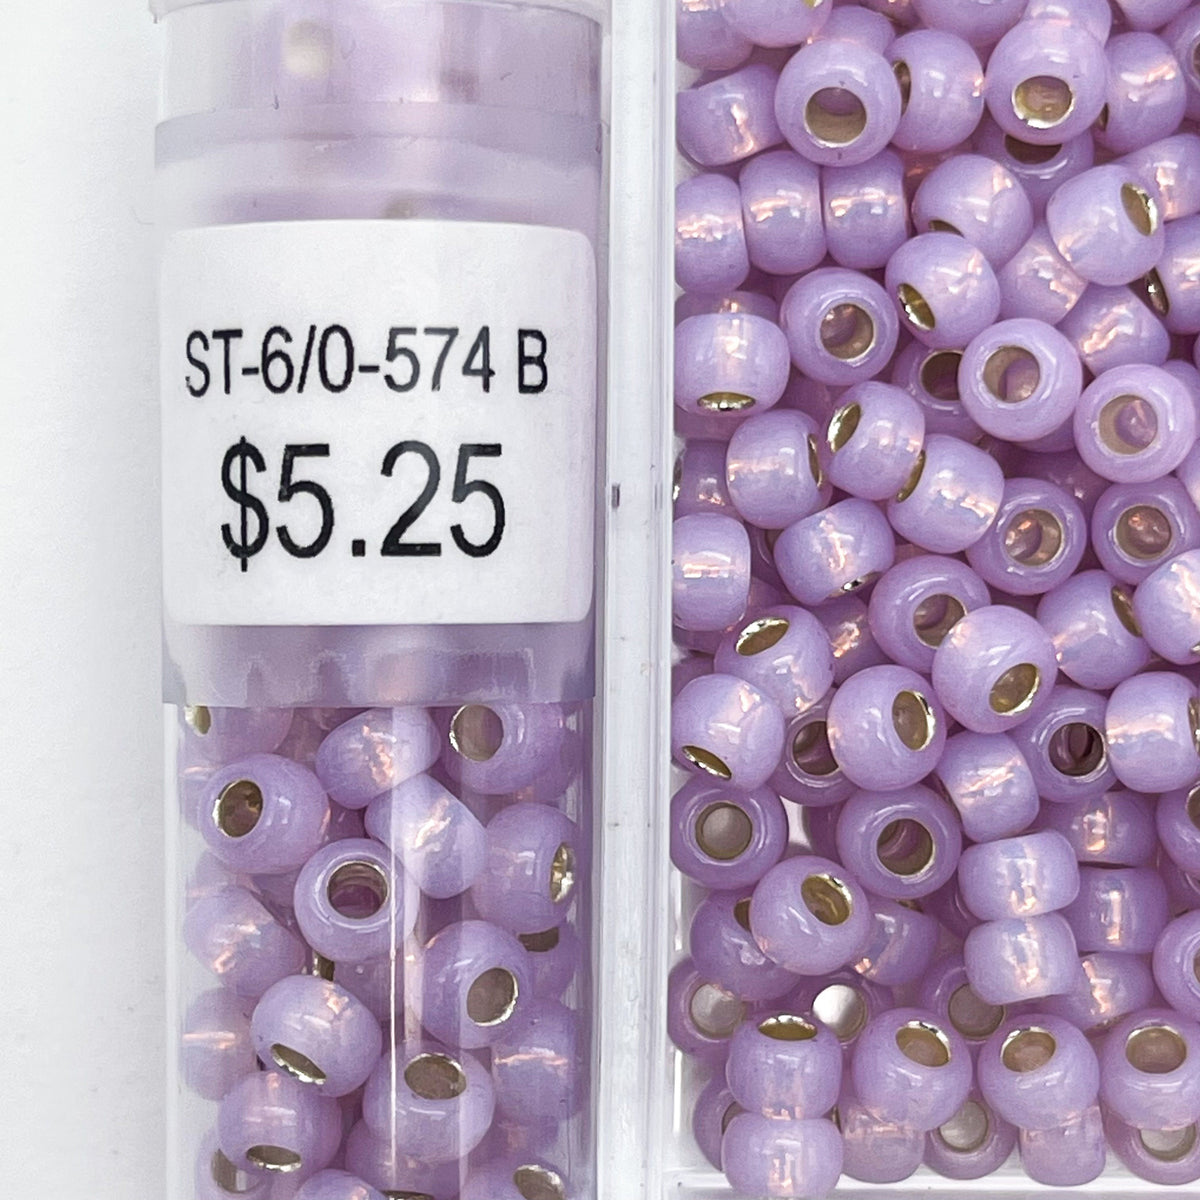 Cassis Purple 6/0 (4MM) Seed Beads